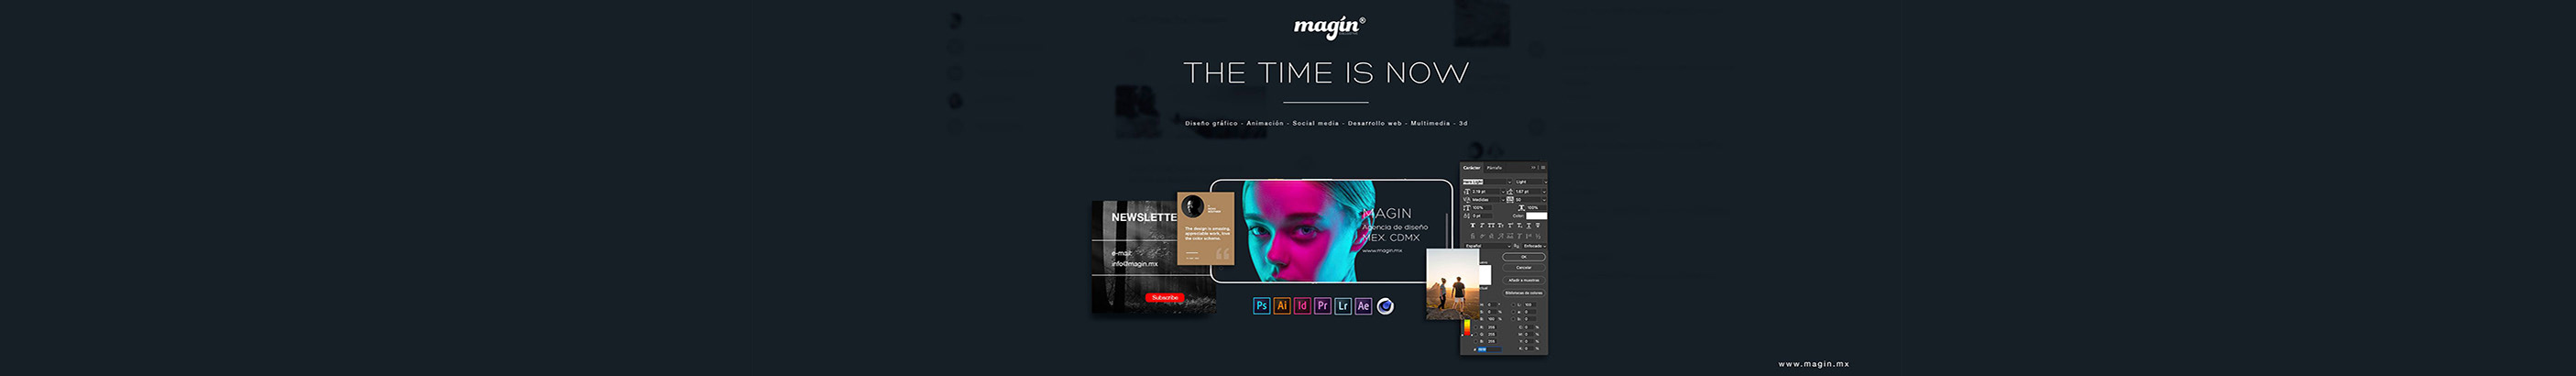 Magin Collective's profile banner